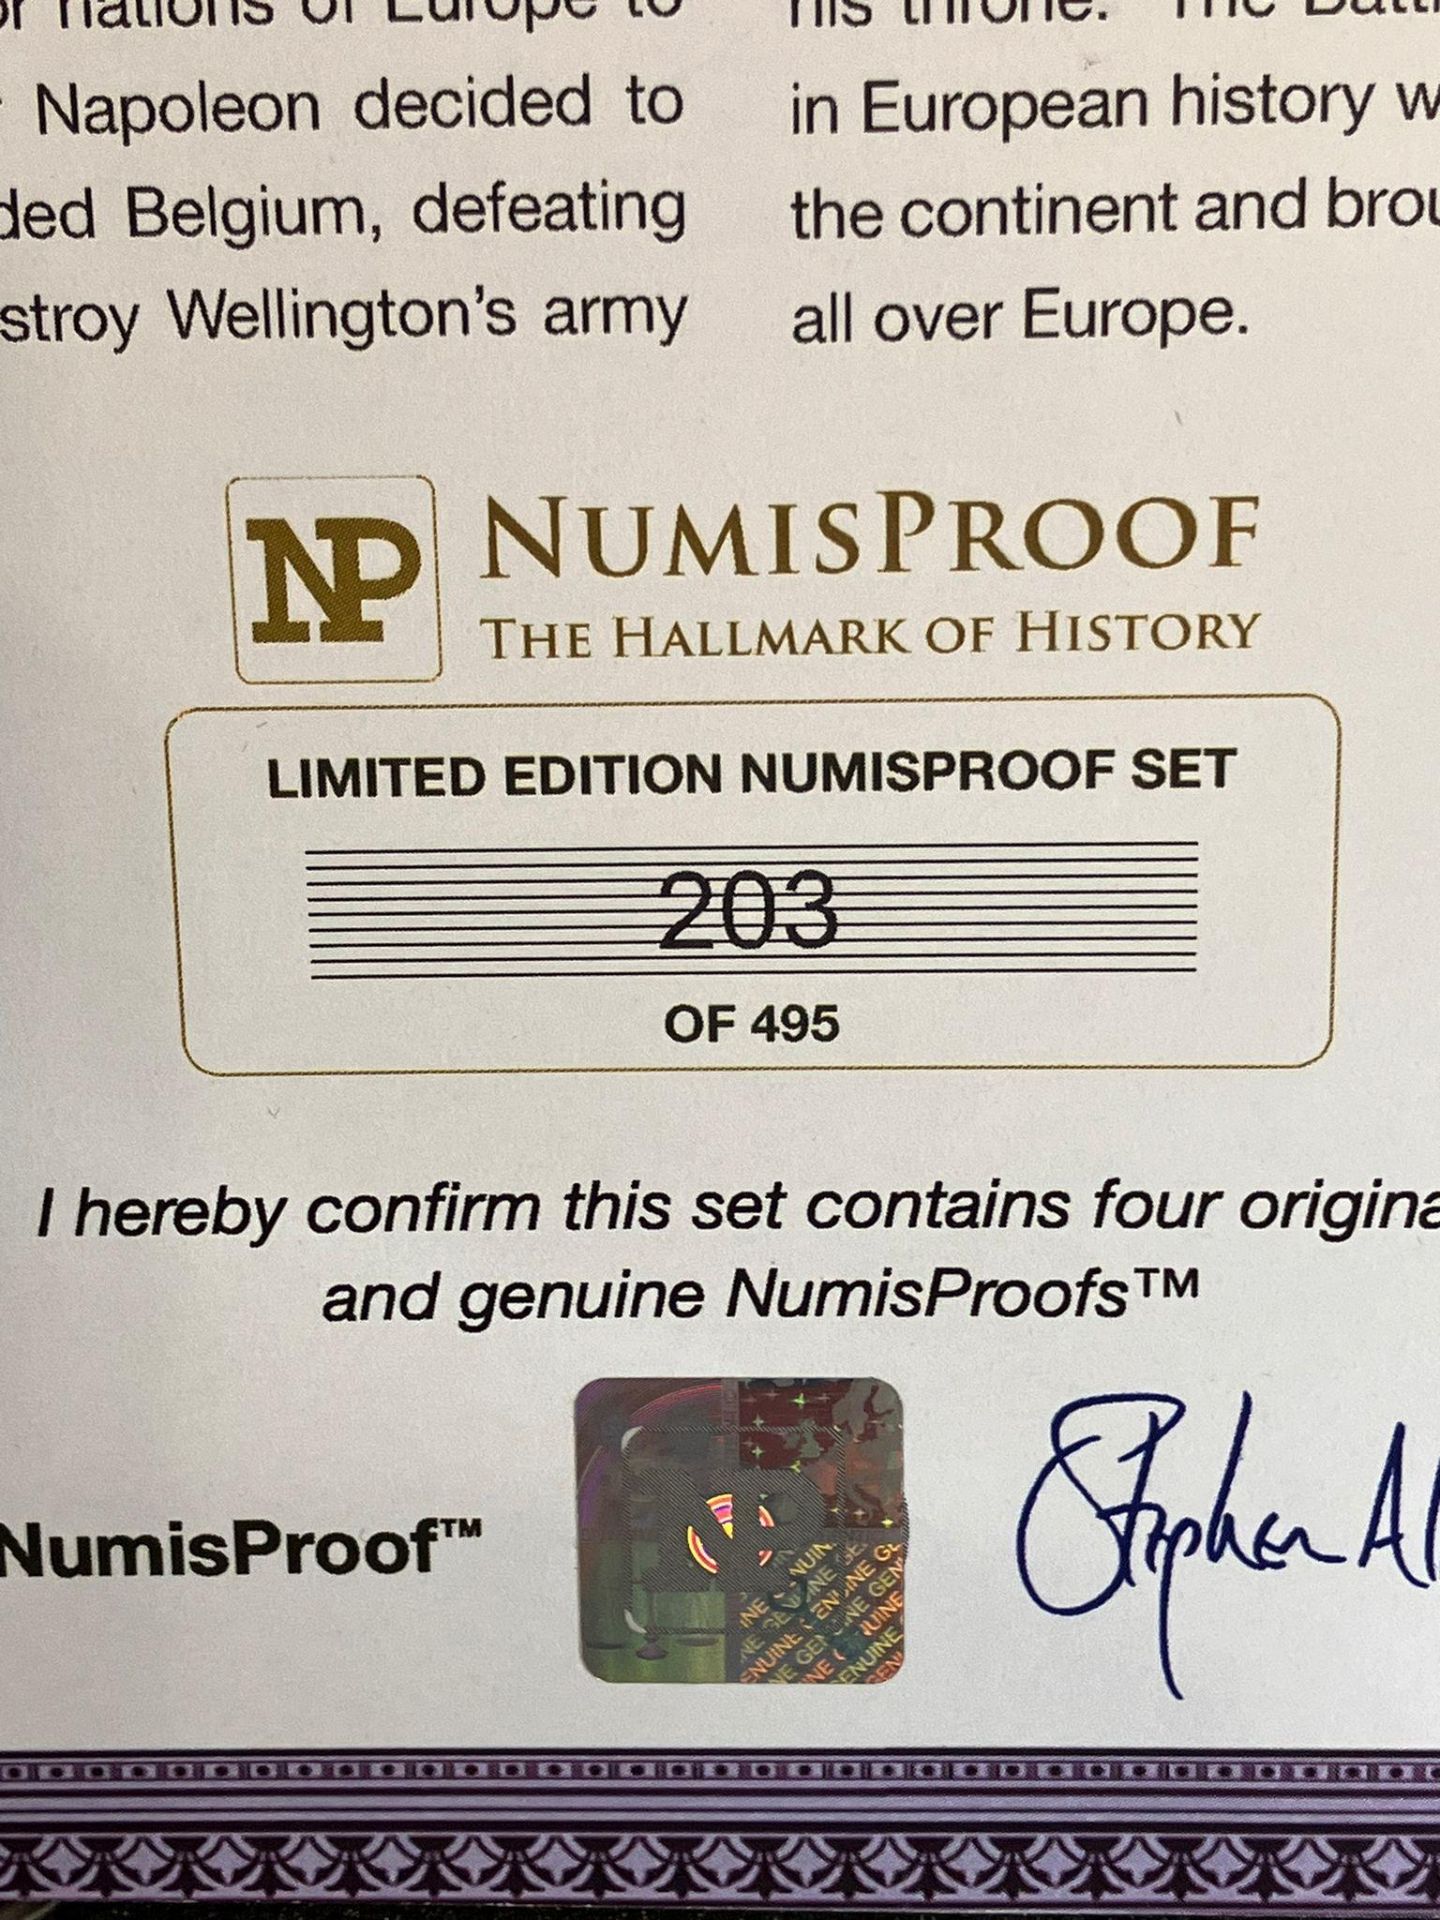 Rare Battle of Waterloo ‘NUMISPROOF’ commemorative set. Consisting 4 x large GOLD PLATED Numisproofs - Image 11 of 17